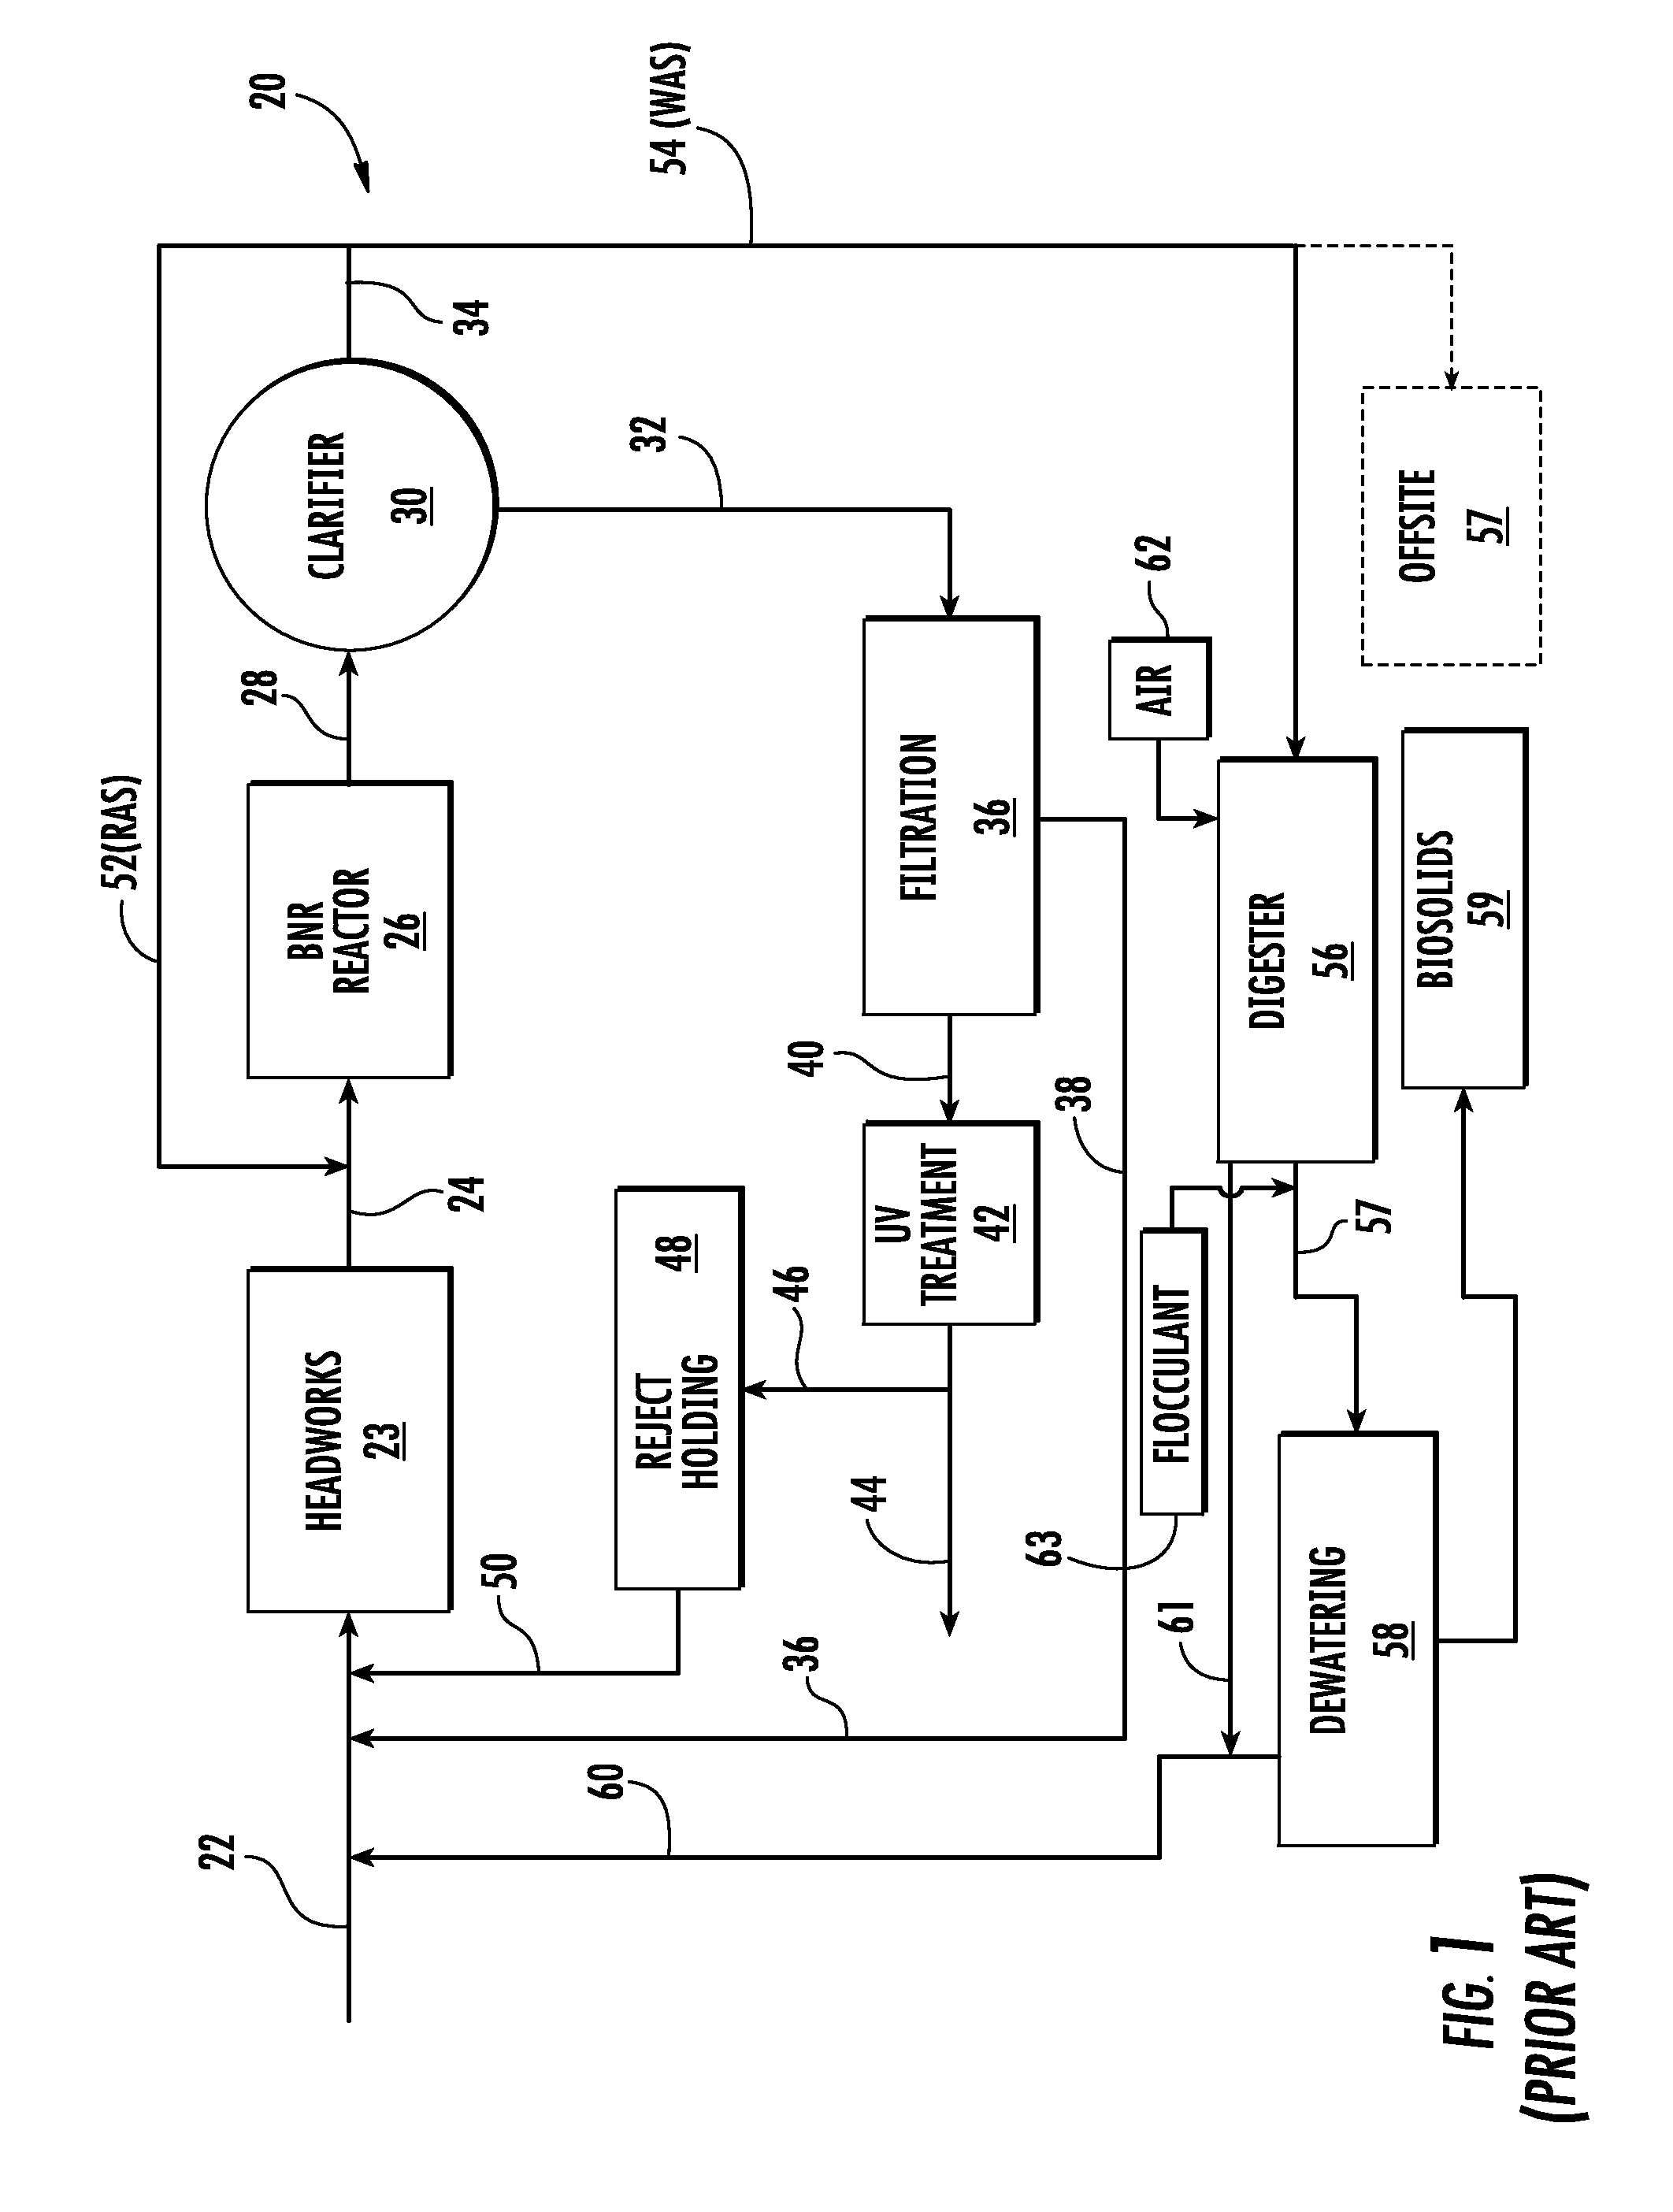 Systems and Methods for Enhanced Facultative Biosolids Stabilization